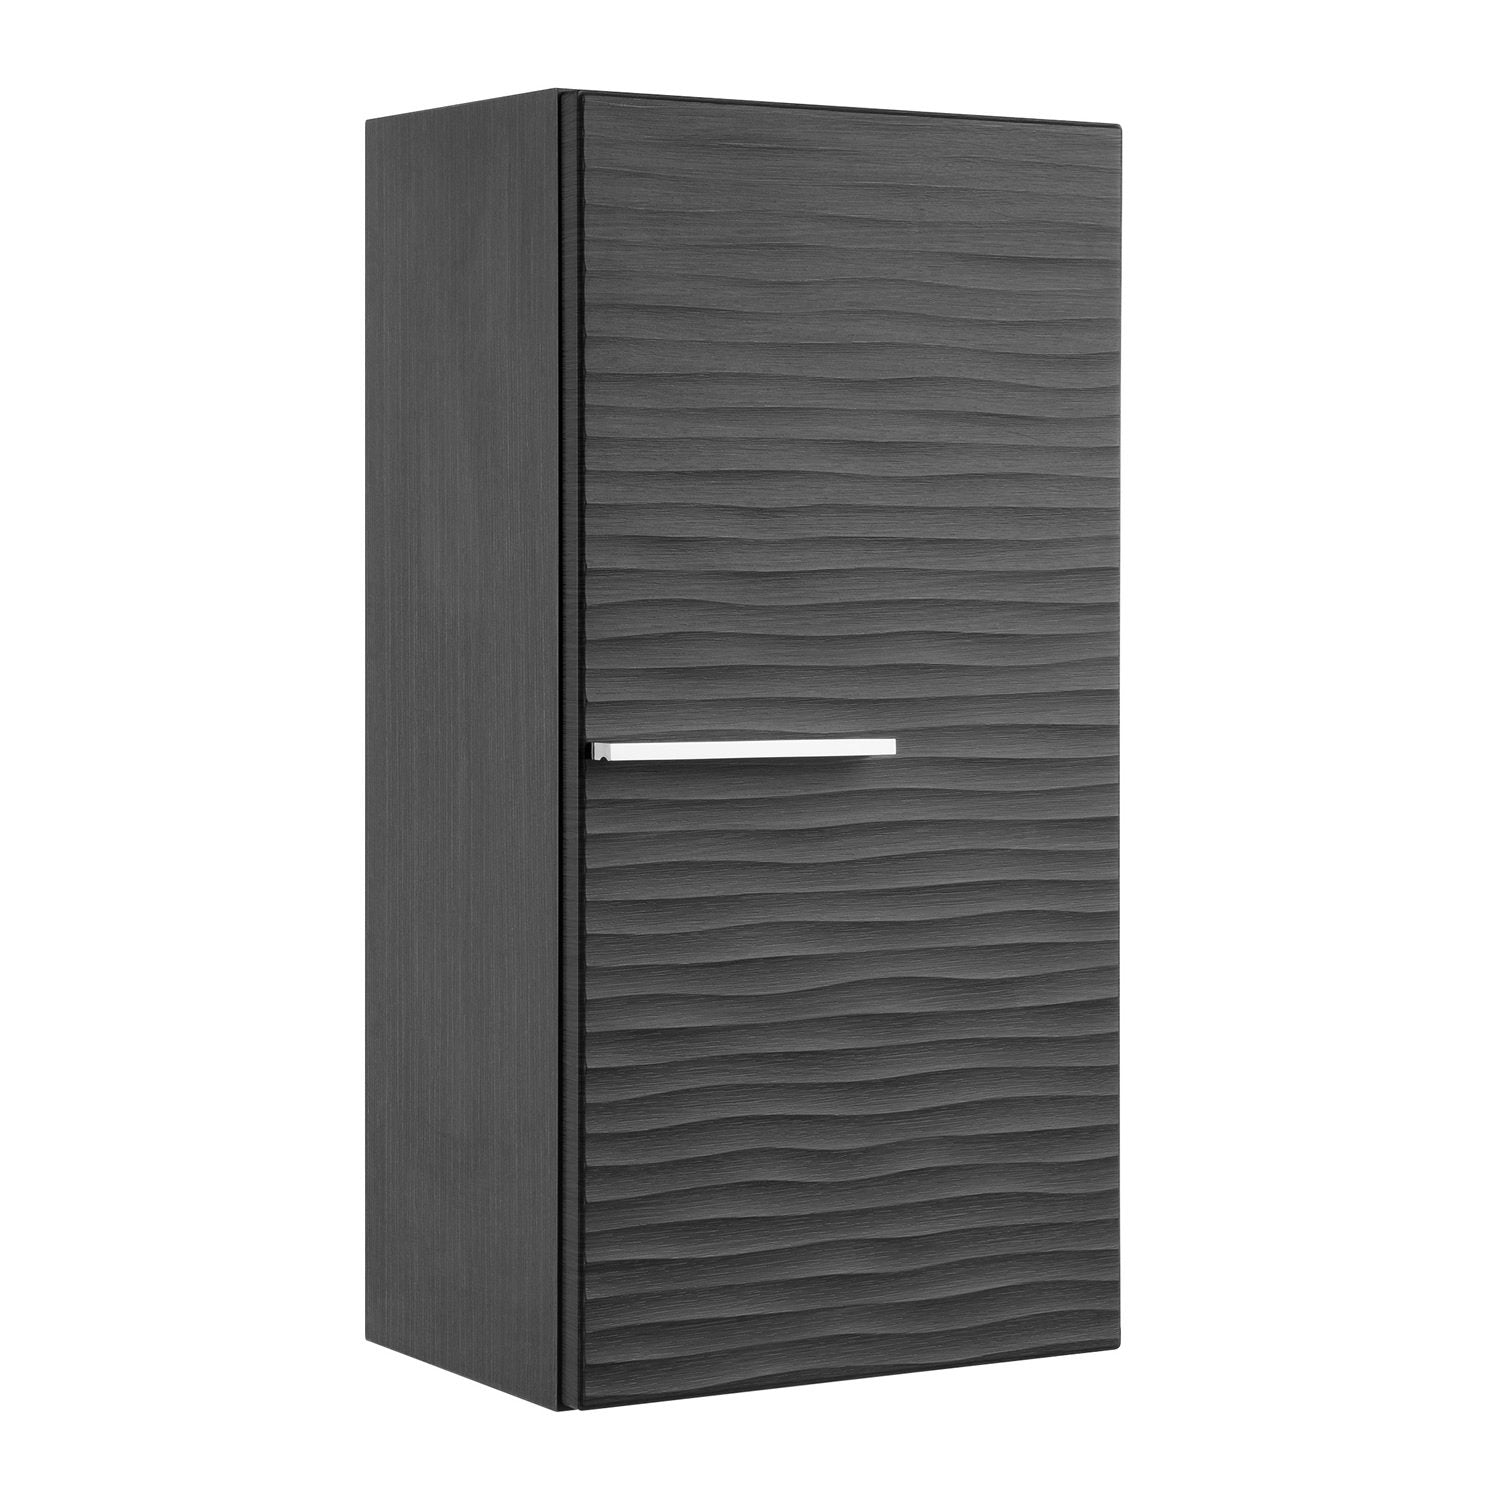 16" Small Side Cabinet, Wall Mount, 1 Door whit Handle and Soft Close and Left Opening, Grey, Serie Dune by VALENZUELA